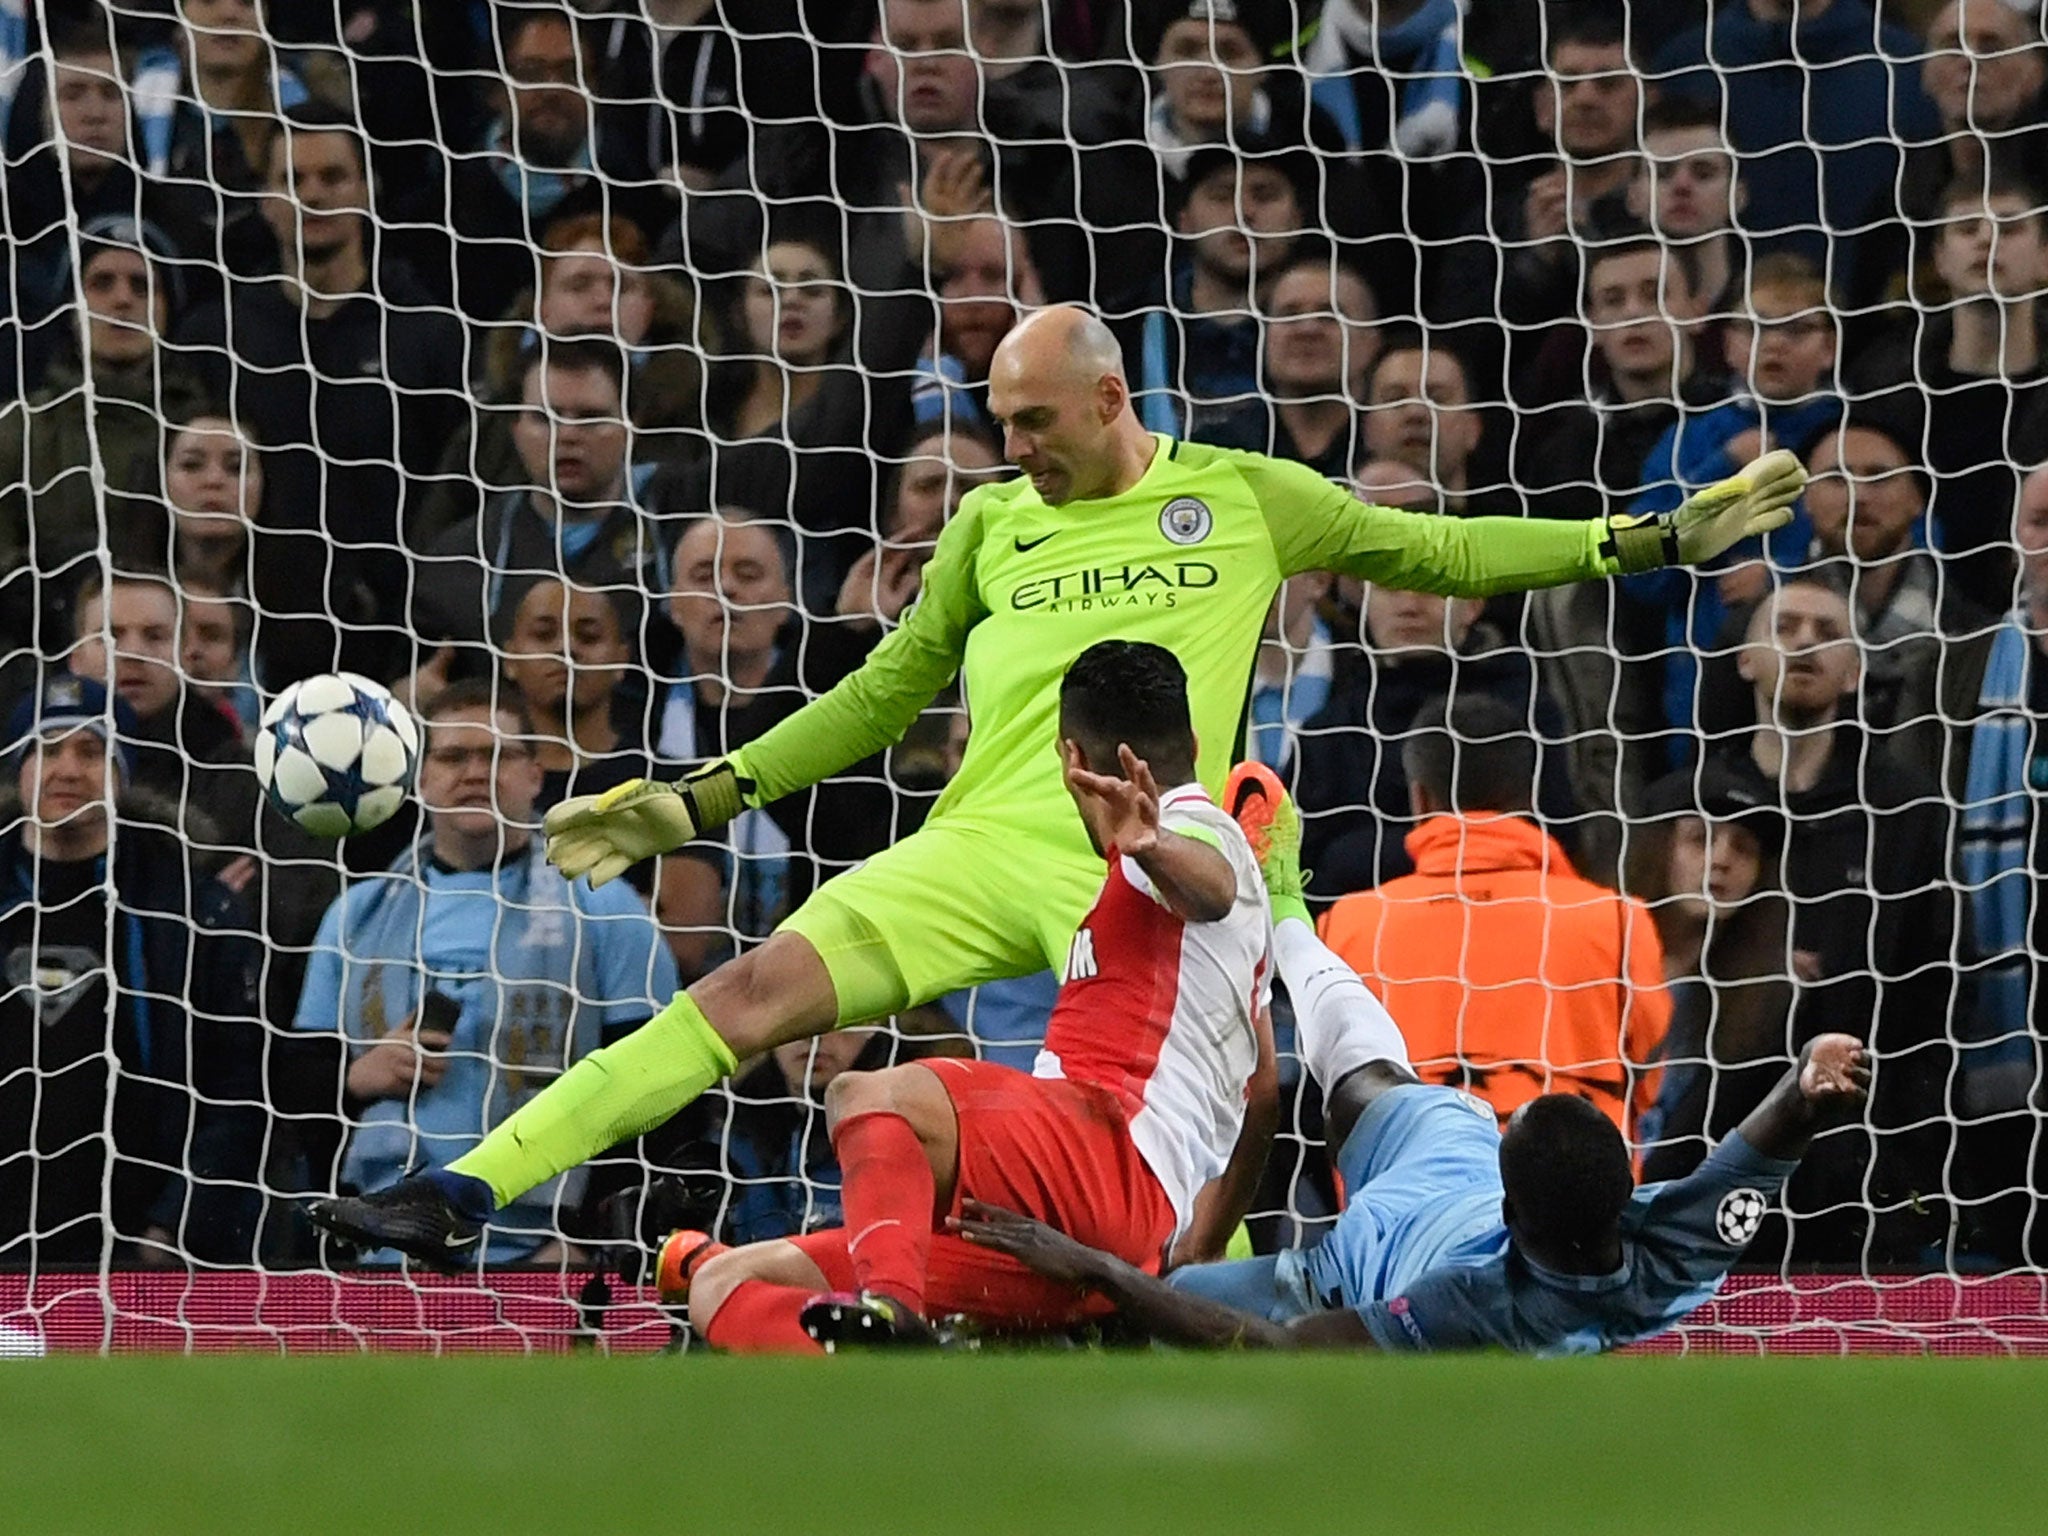 Manchester City don't have the defensive strength to realistically win the Champions League yet